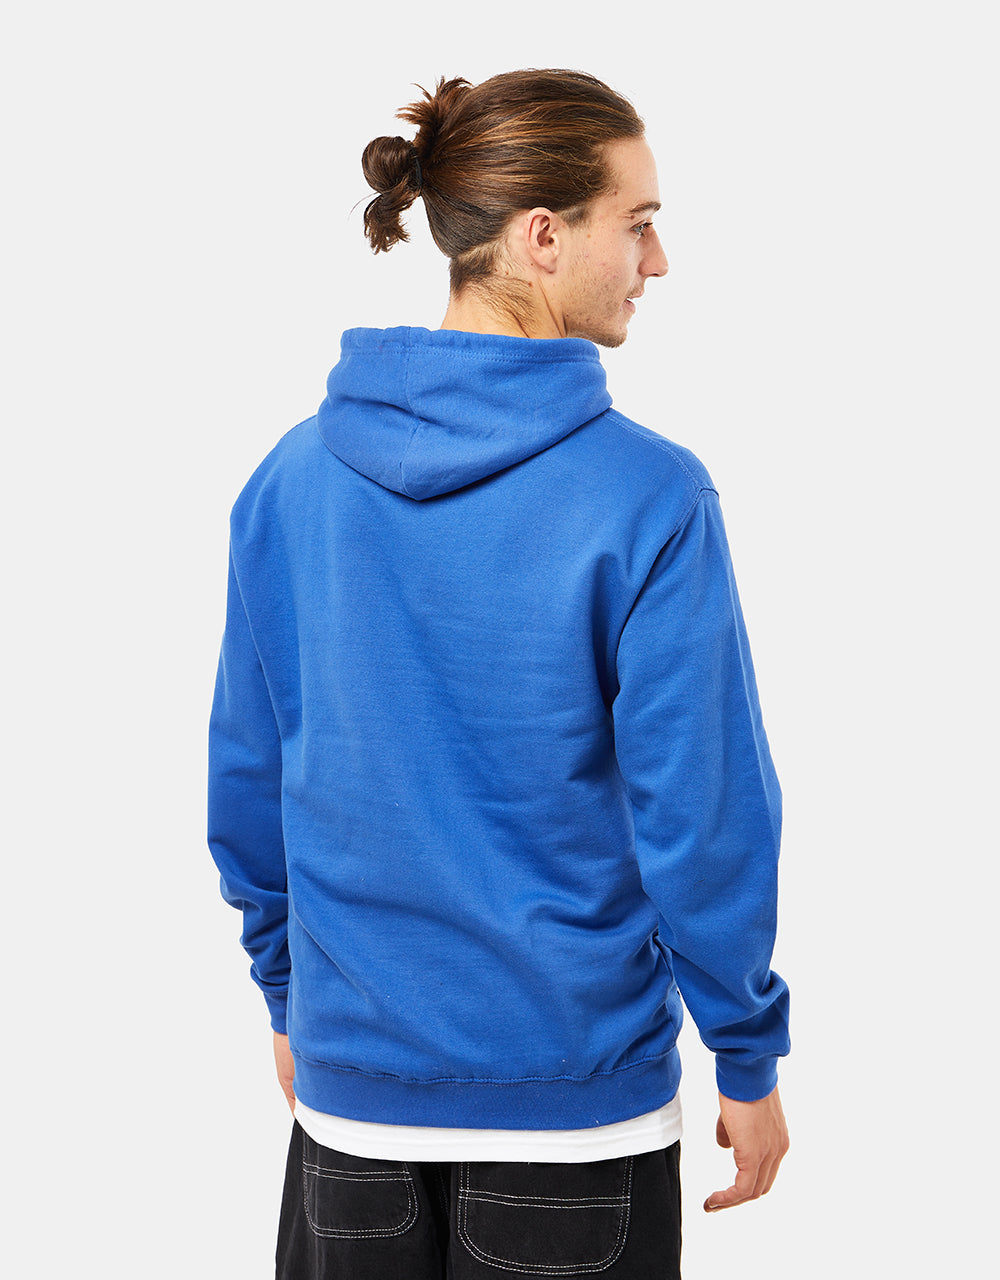 Route One Instant Pullover Hoodie - Royal Blue